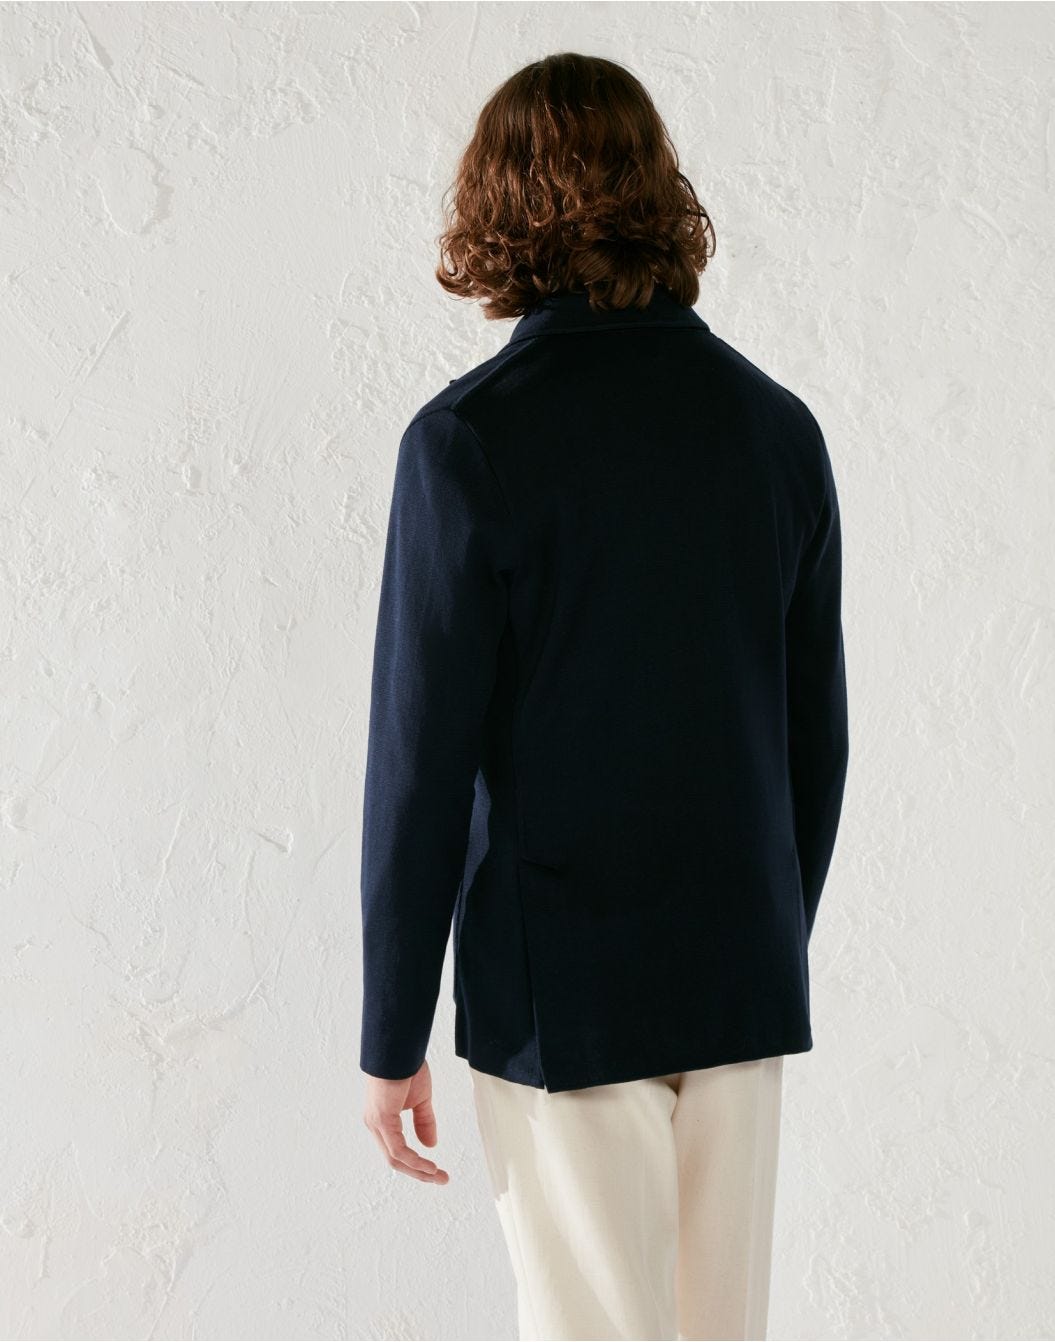 Extra-fine cotton double-breasted knit jacket